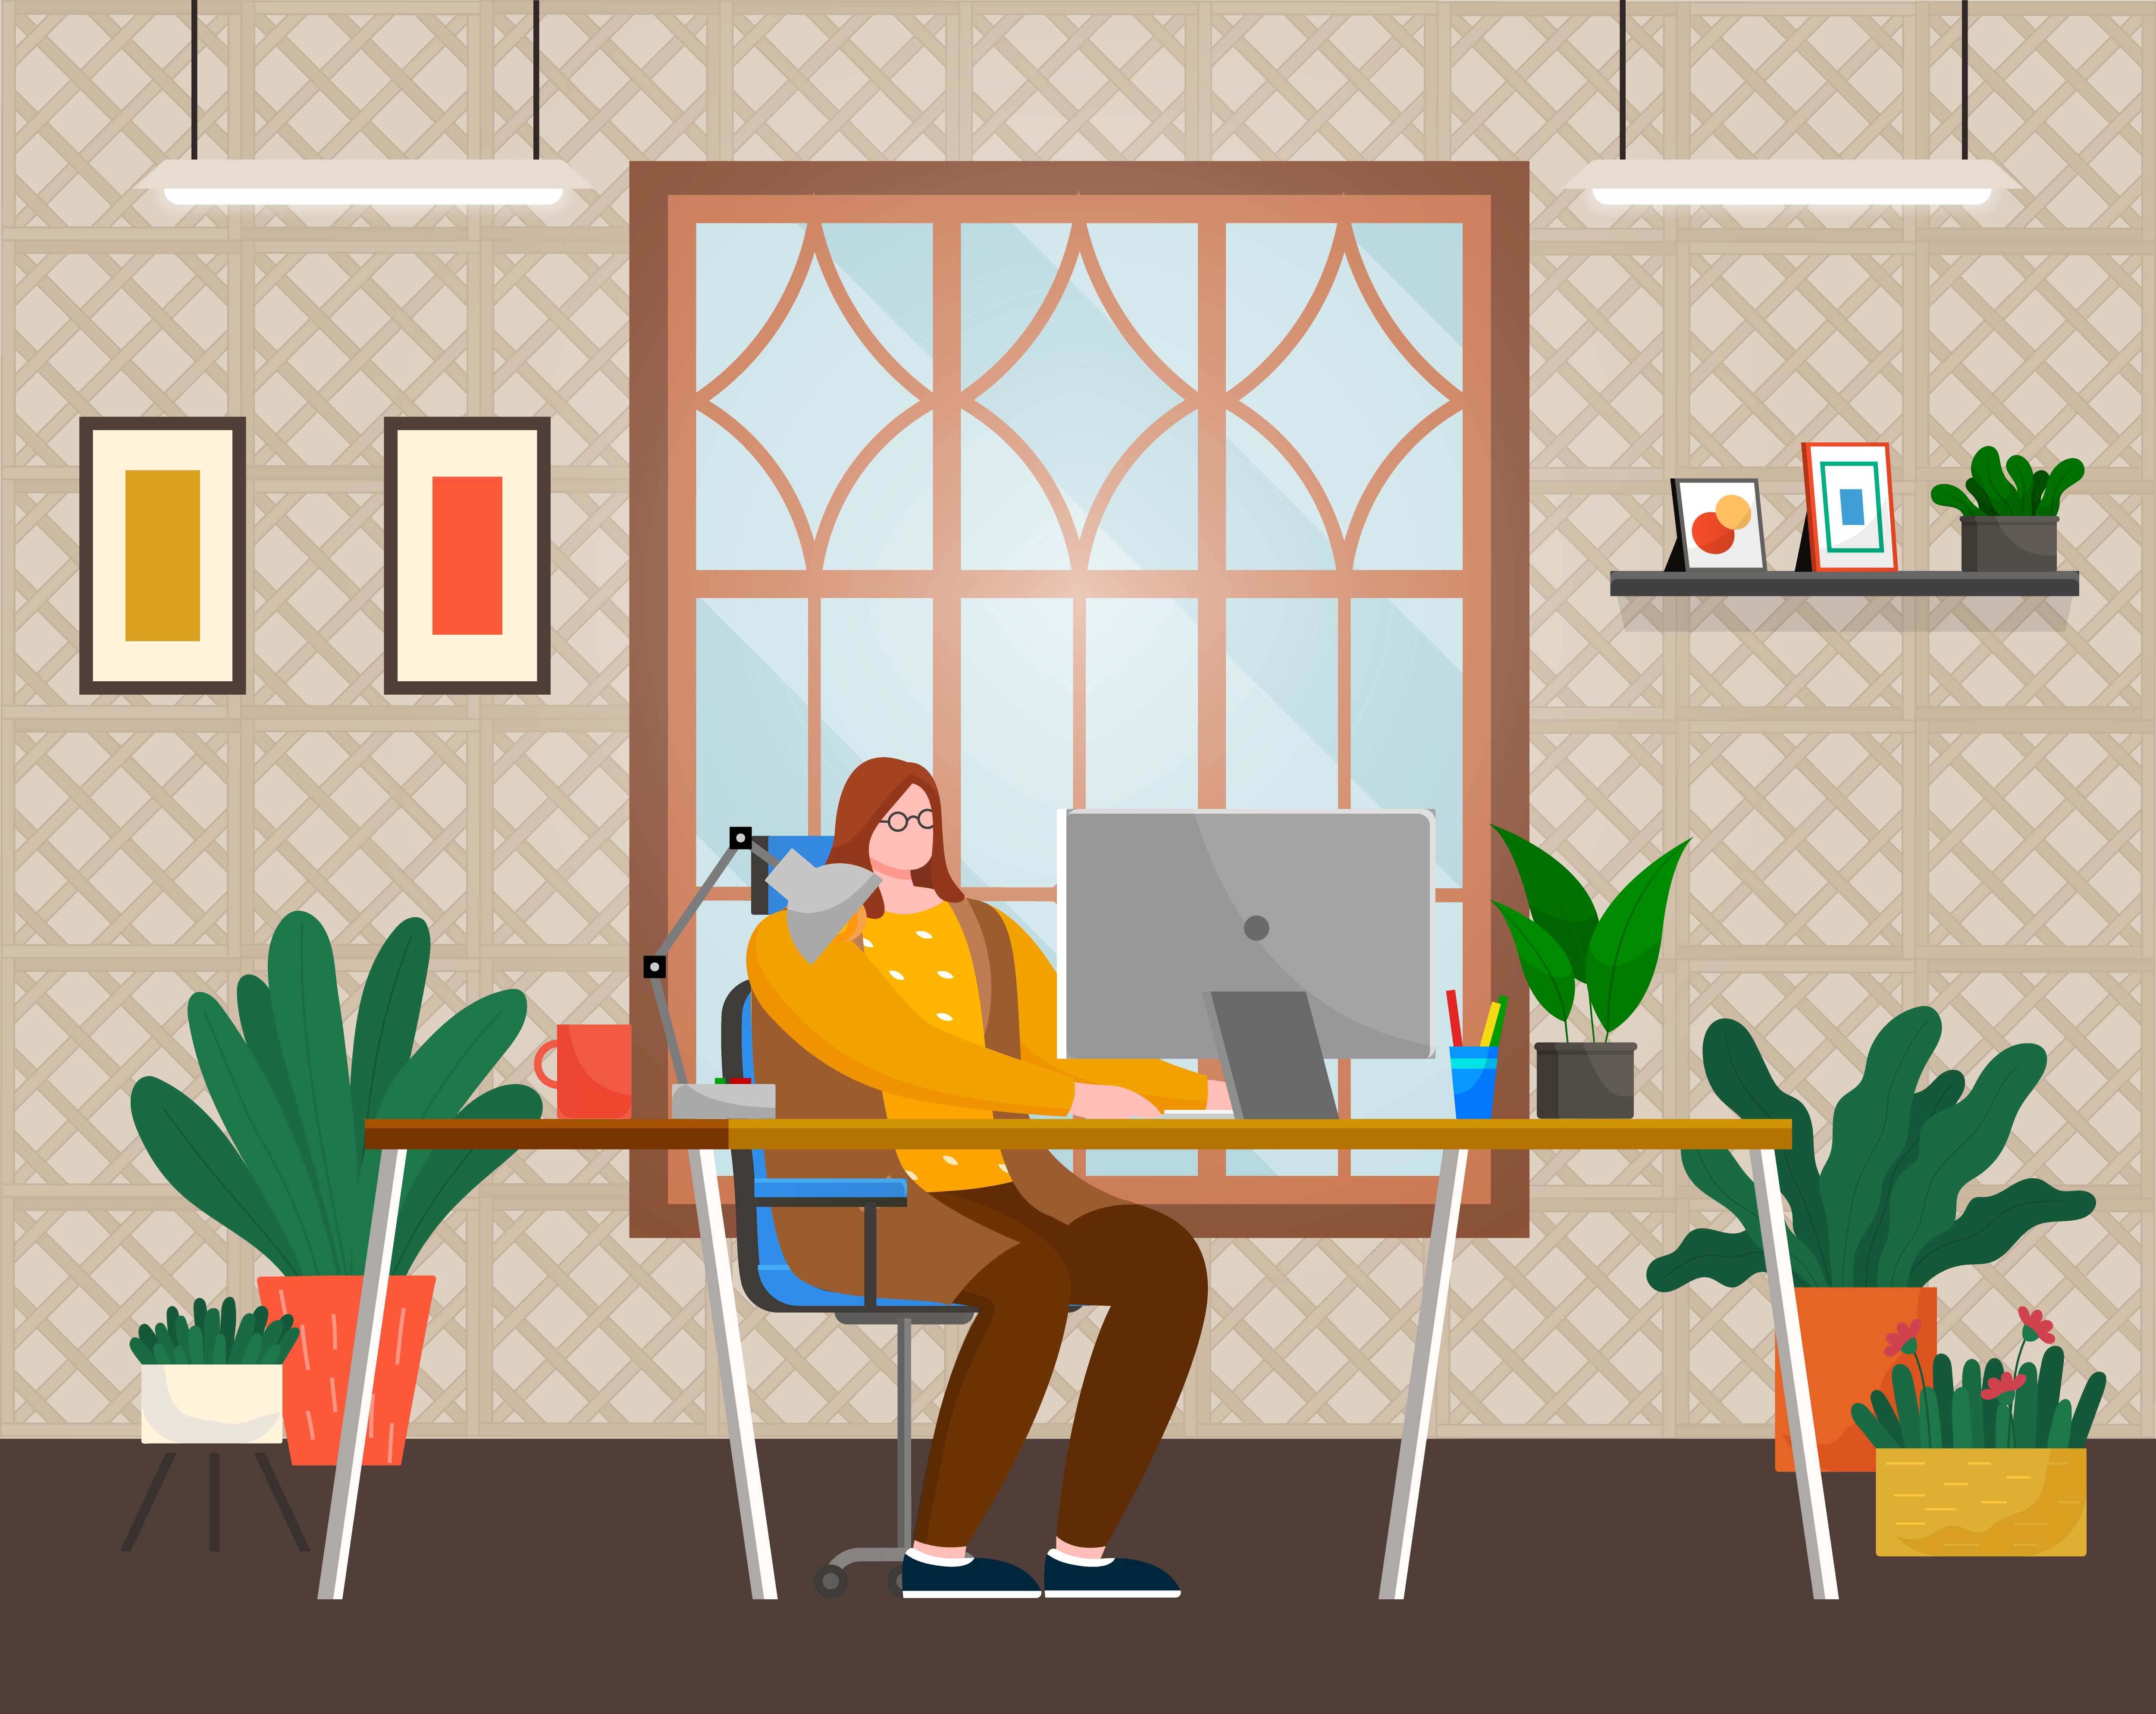 Worker using computer on workplace in office or at home. Female typing in pc wireless device sitting at table with cup, pan and lamp symbol near window. Employee looking at laptop indoor vector. Employee Woman Working with Computer Indoor Vector